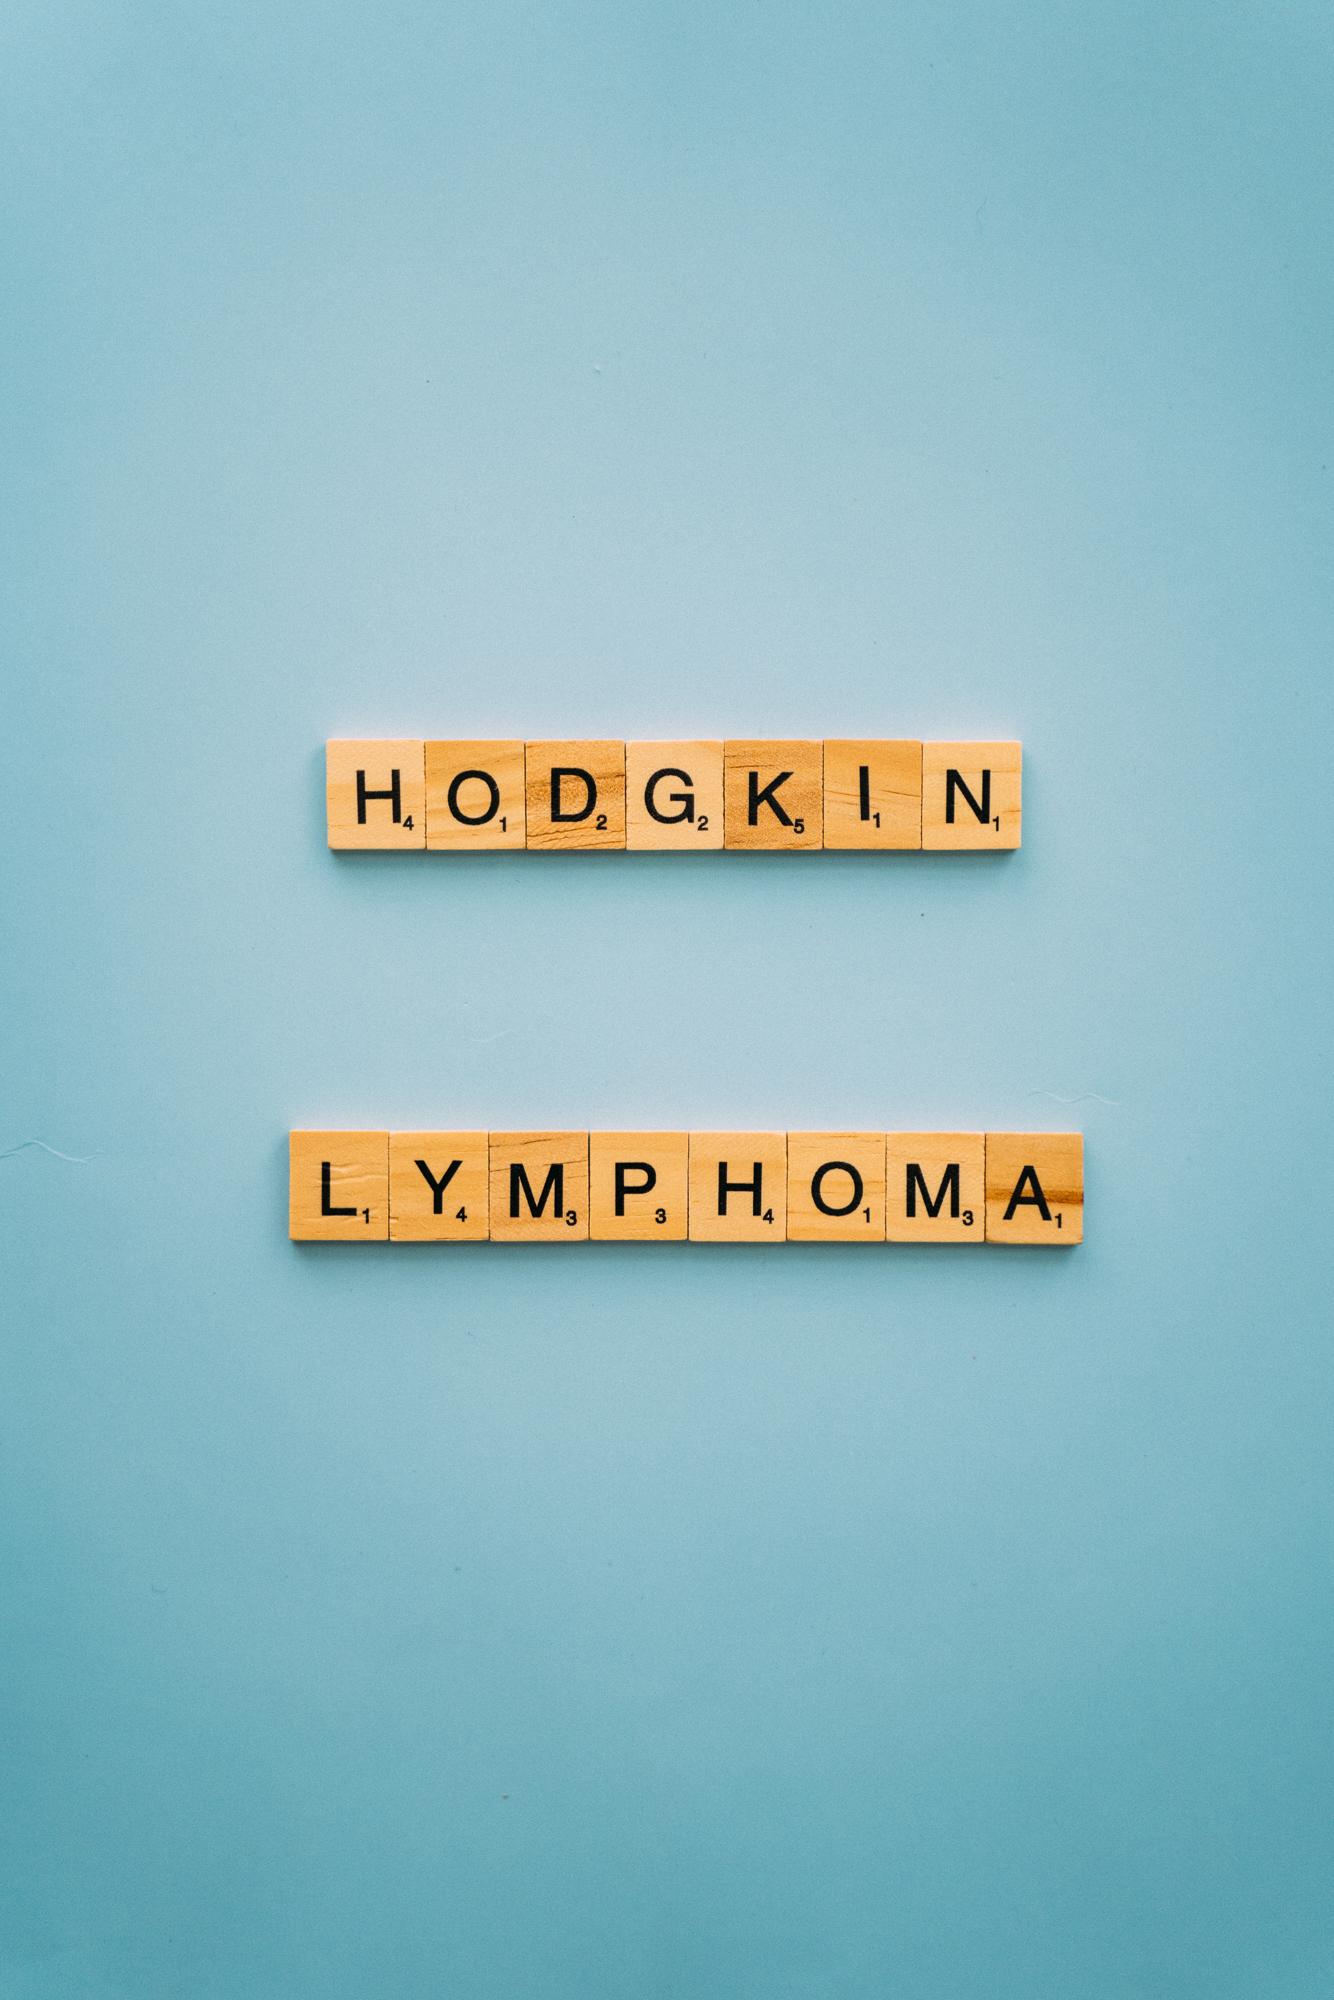 A Doctor Explains The Difference Between Hodgkin And Non Hodgkin Lymphoma